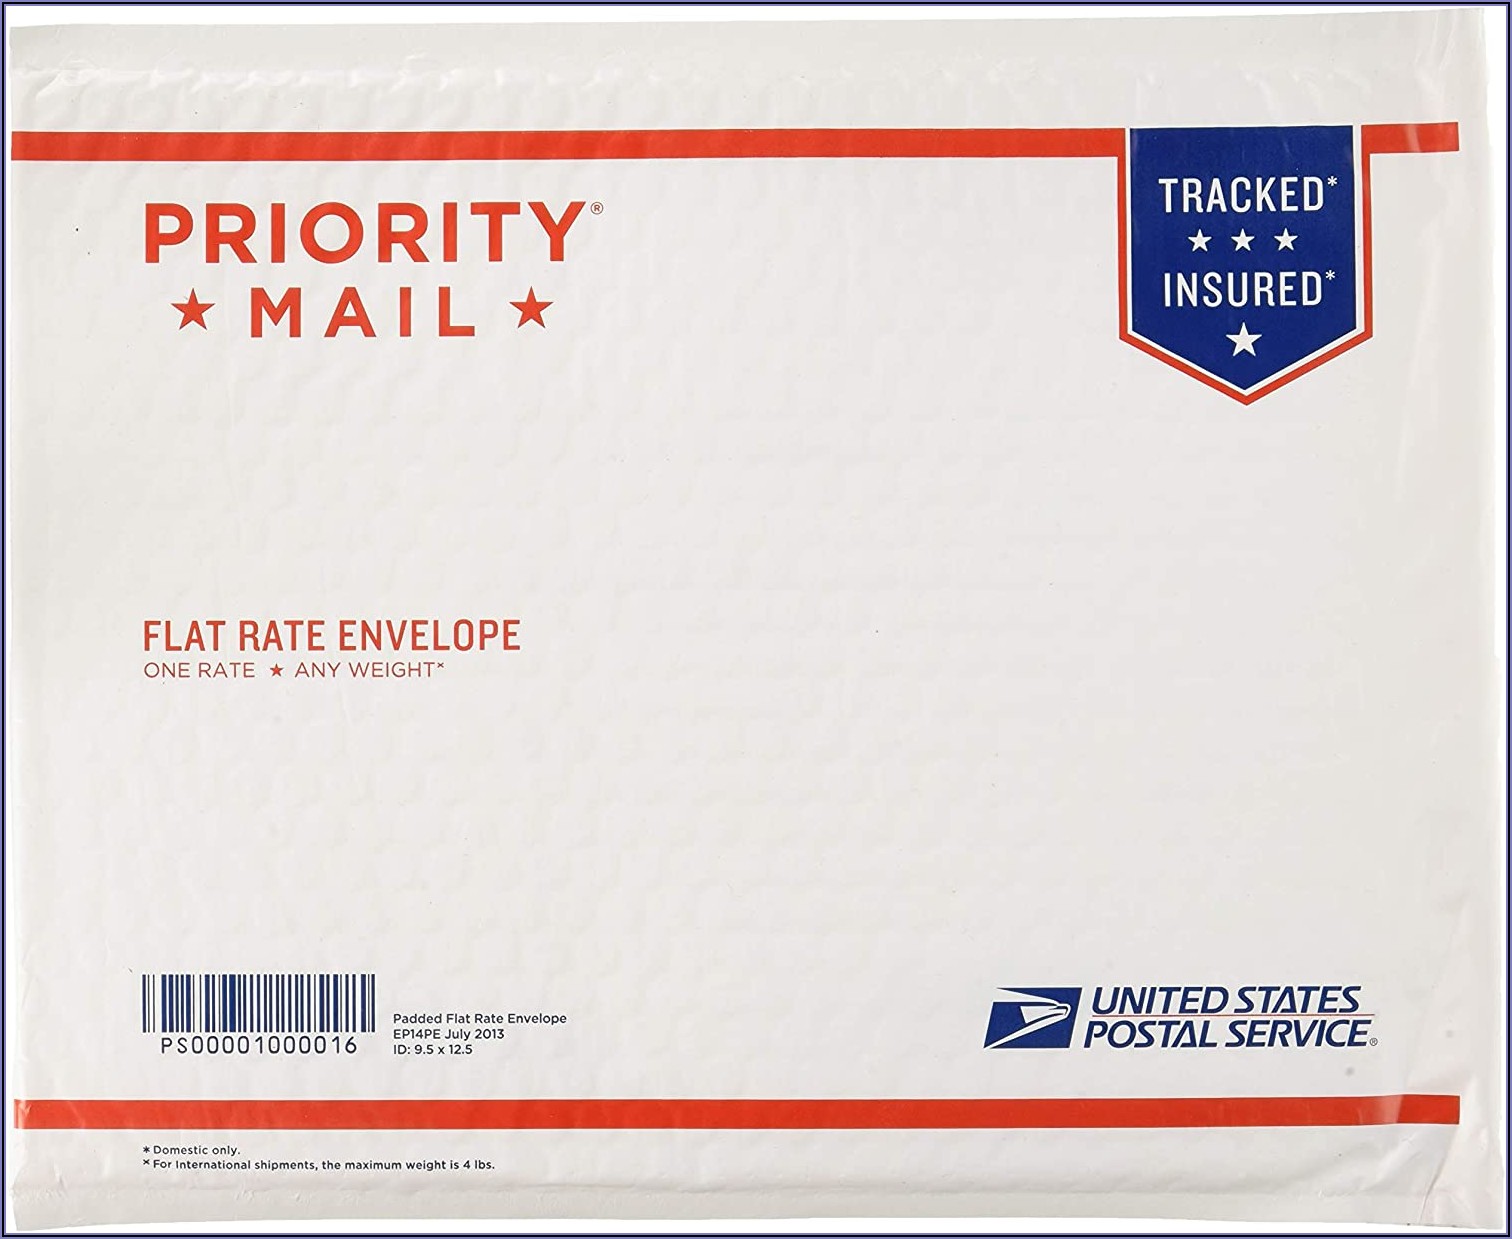 Priority Mail Flat Rate Envelope Postage Cost